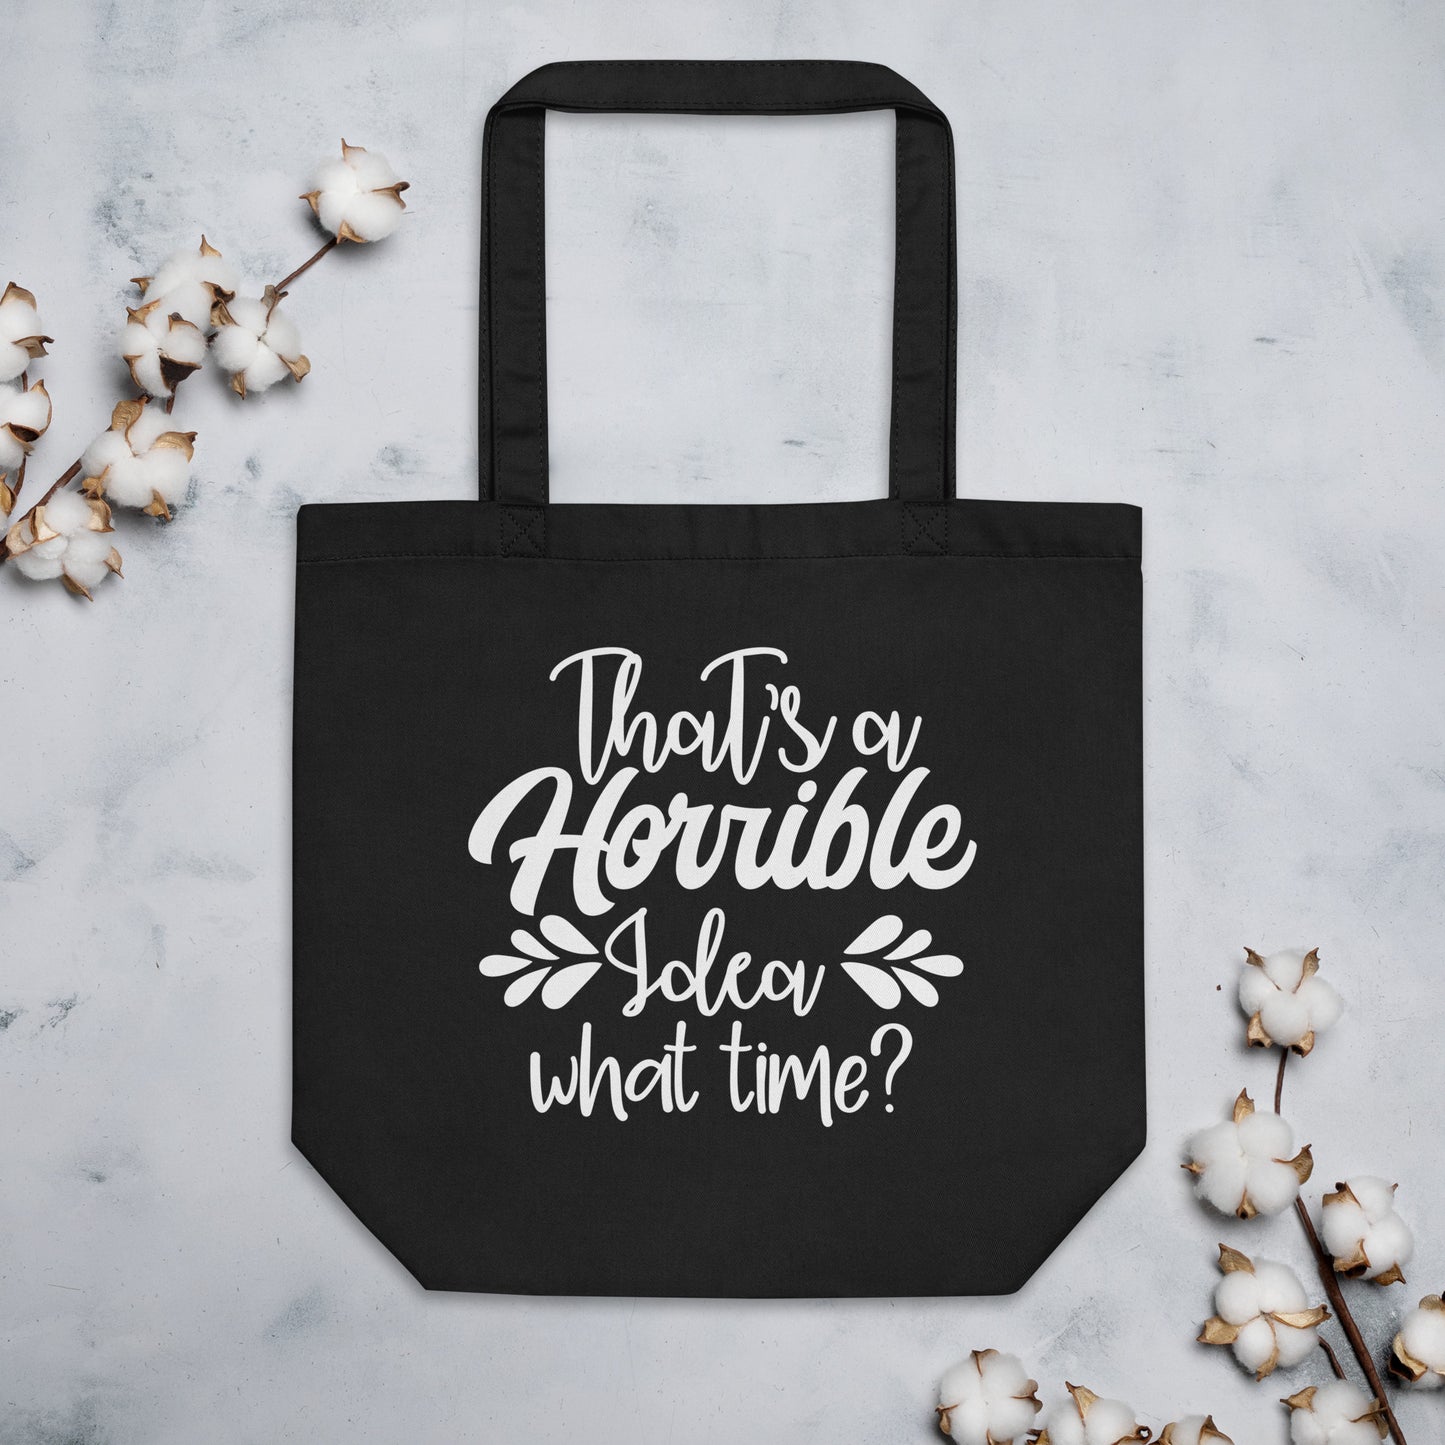 That a Horrible Idea What Time? Eco Tote Bag